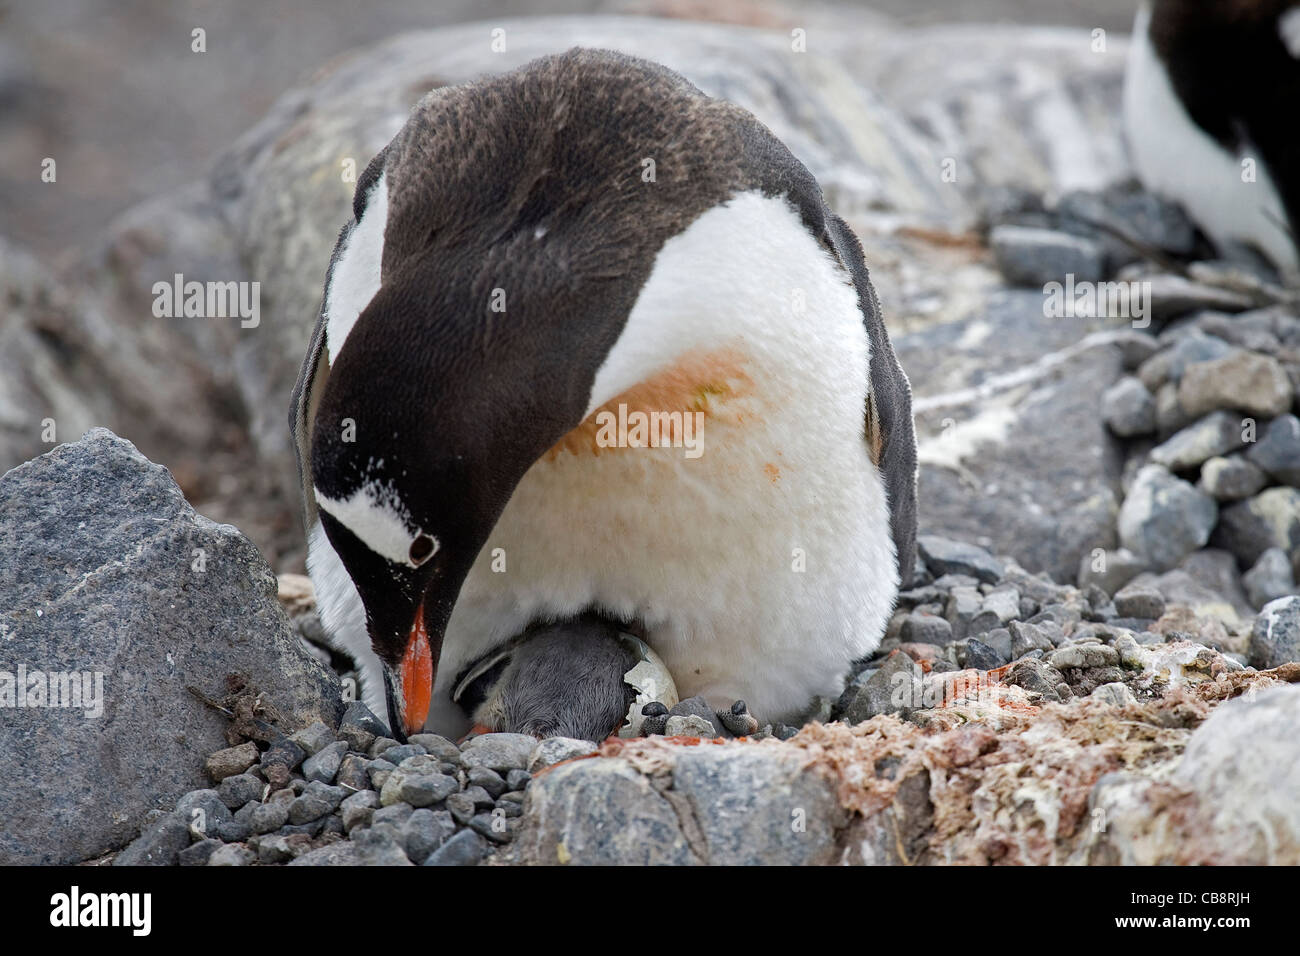 Gentoo Penguin (Pygoscelis papua) and chick hatching from egg in nest at rookery, Wiencke Island, Palmer Archipelago, Antarctica Stock Photo